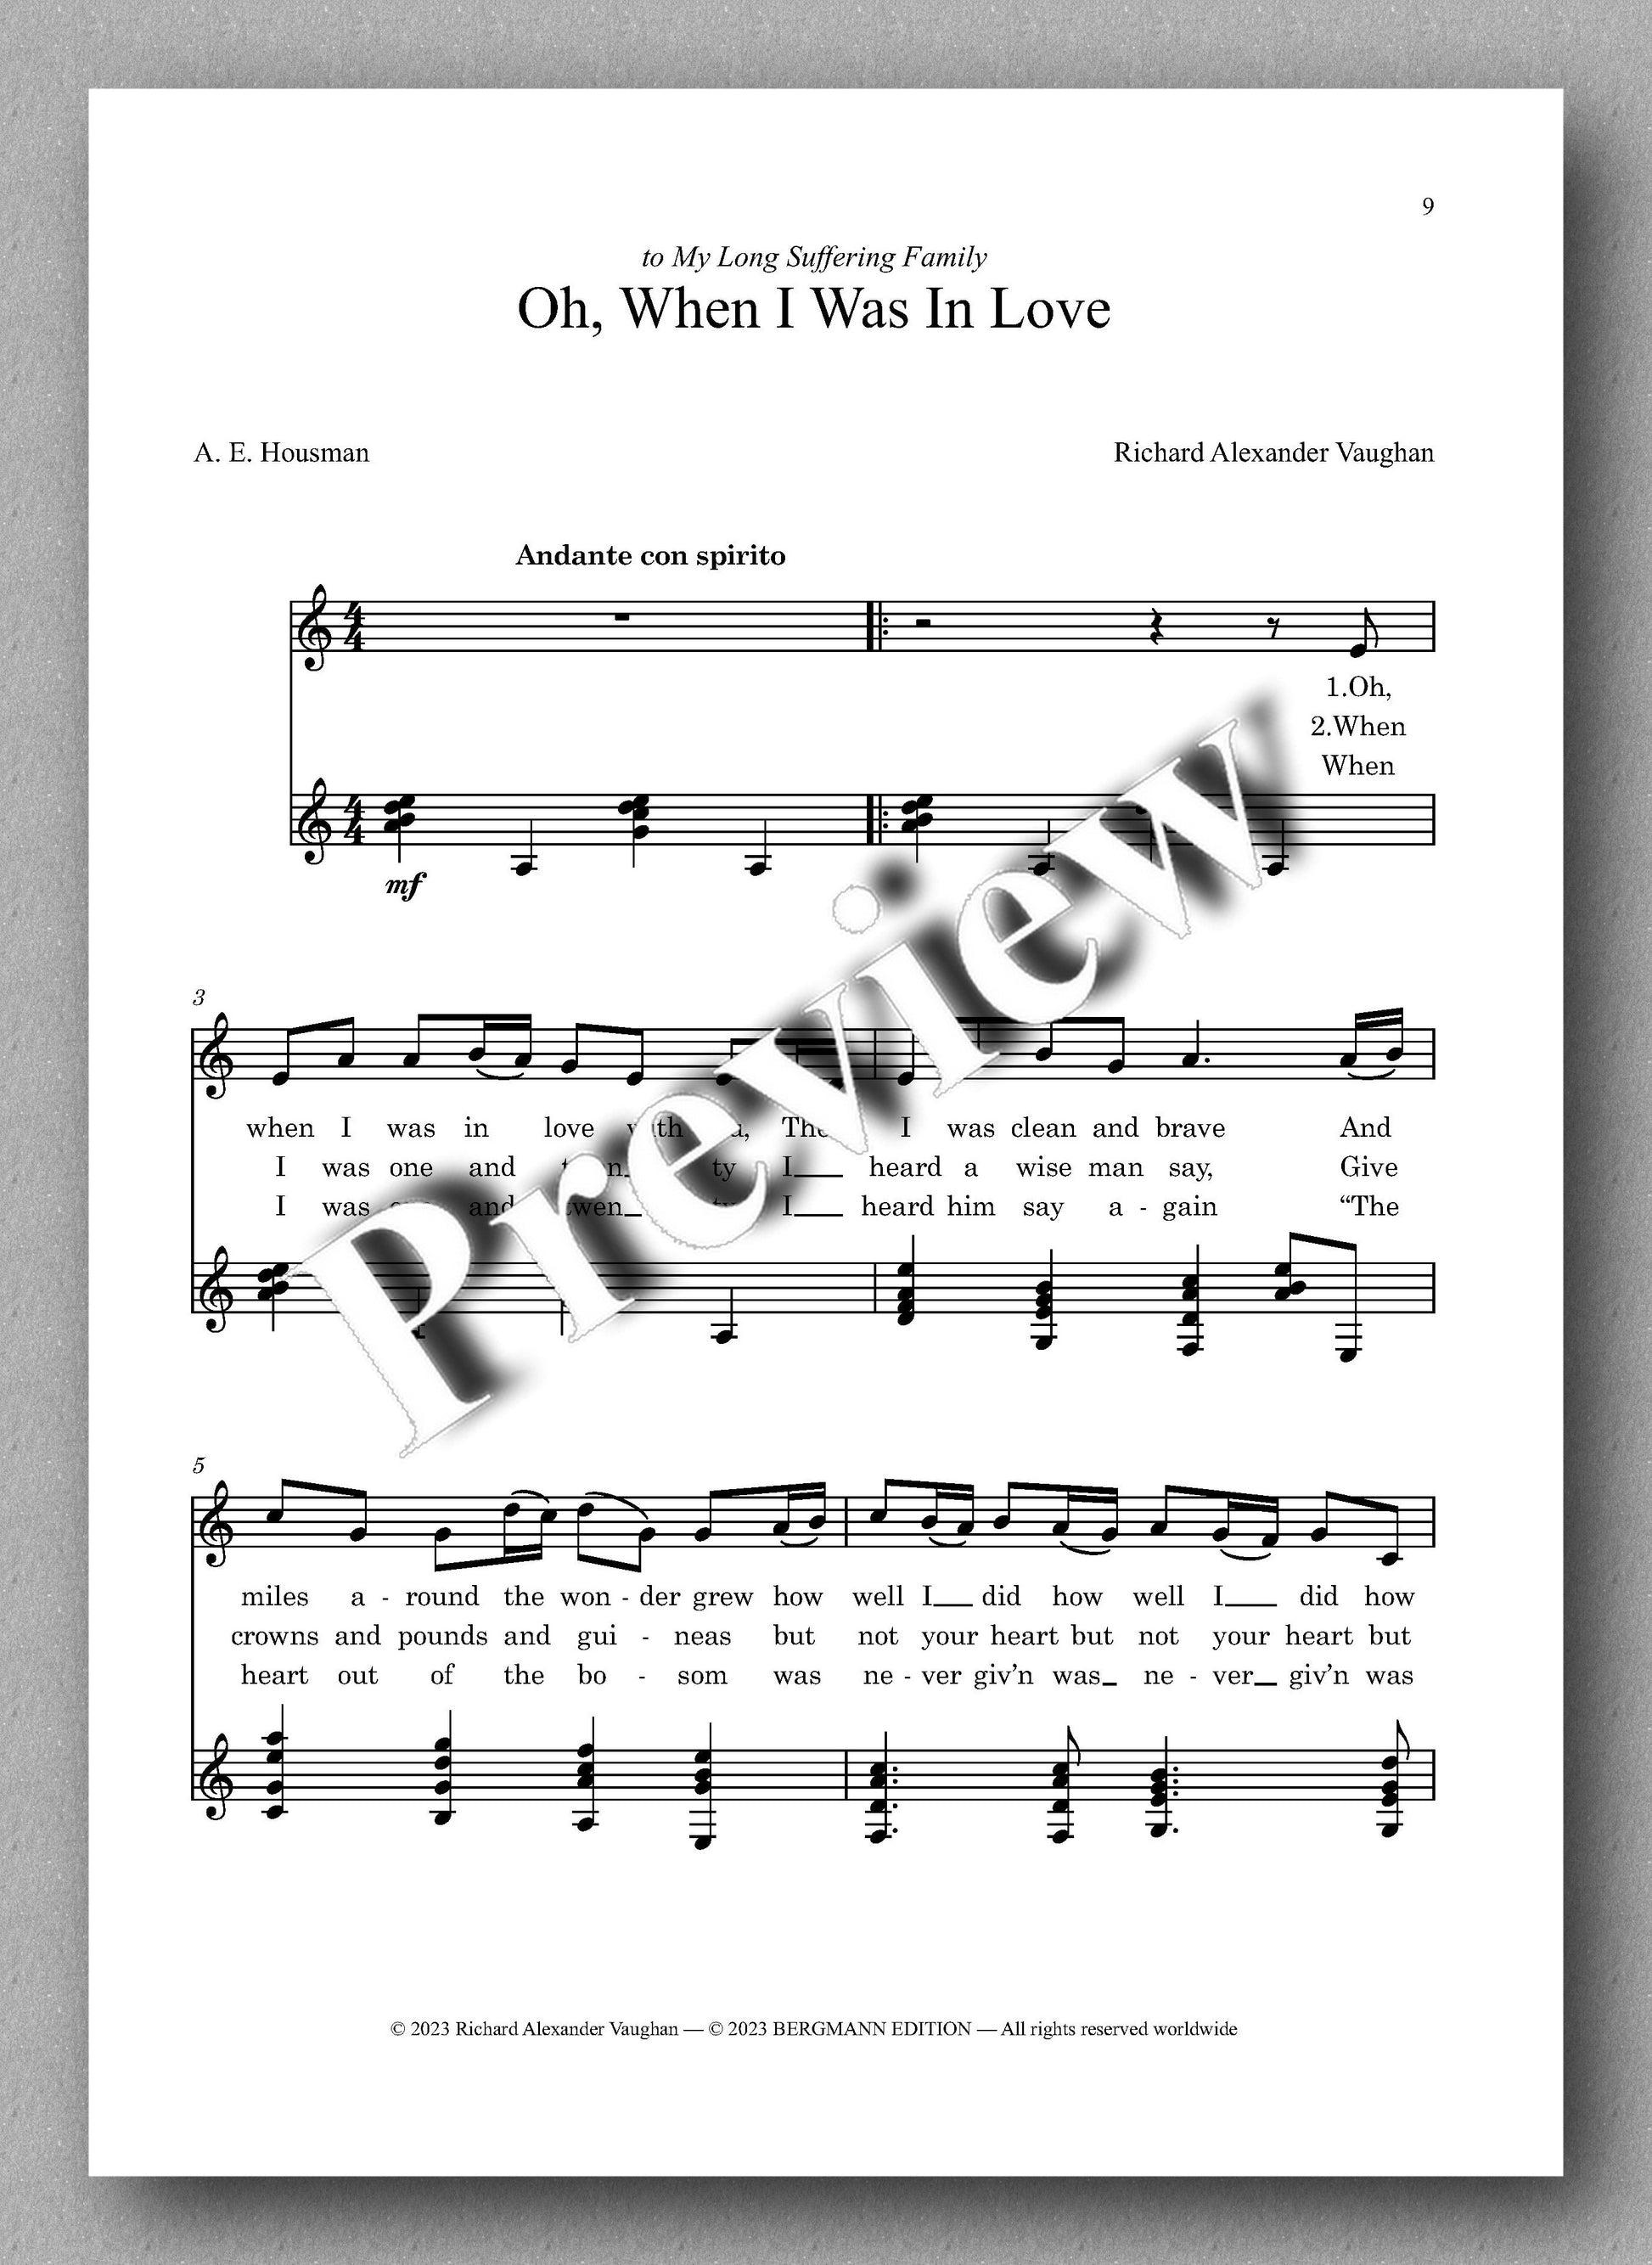 Richard A. Vaughan, Three Songs to Poems by A. E. Housman - preview of the music score 2